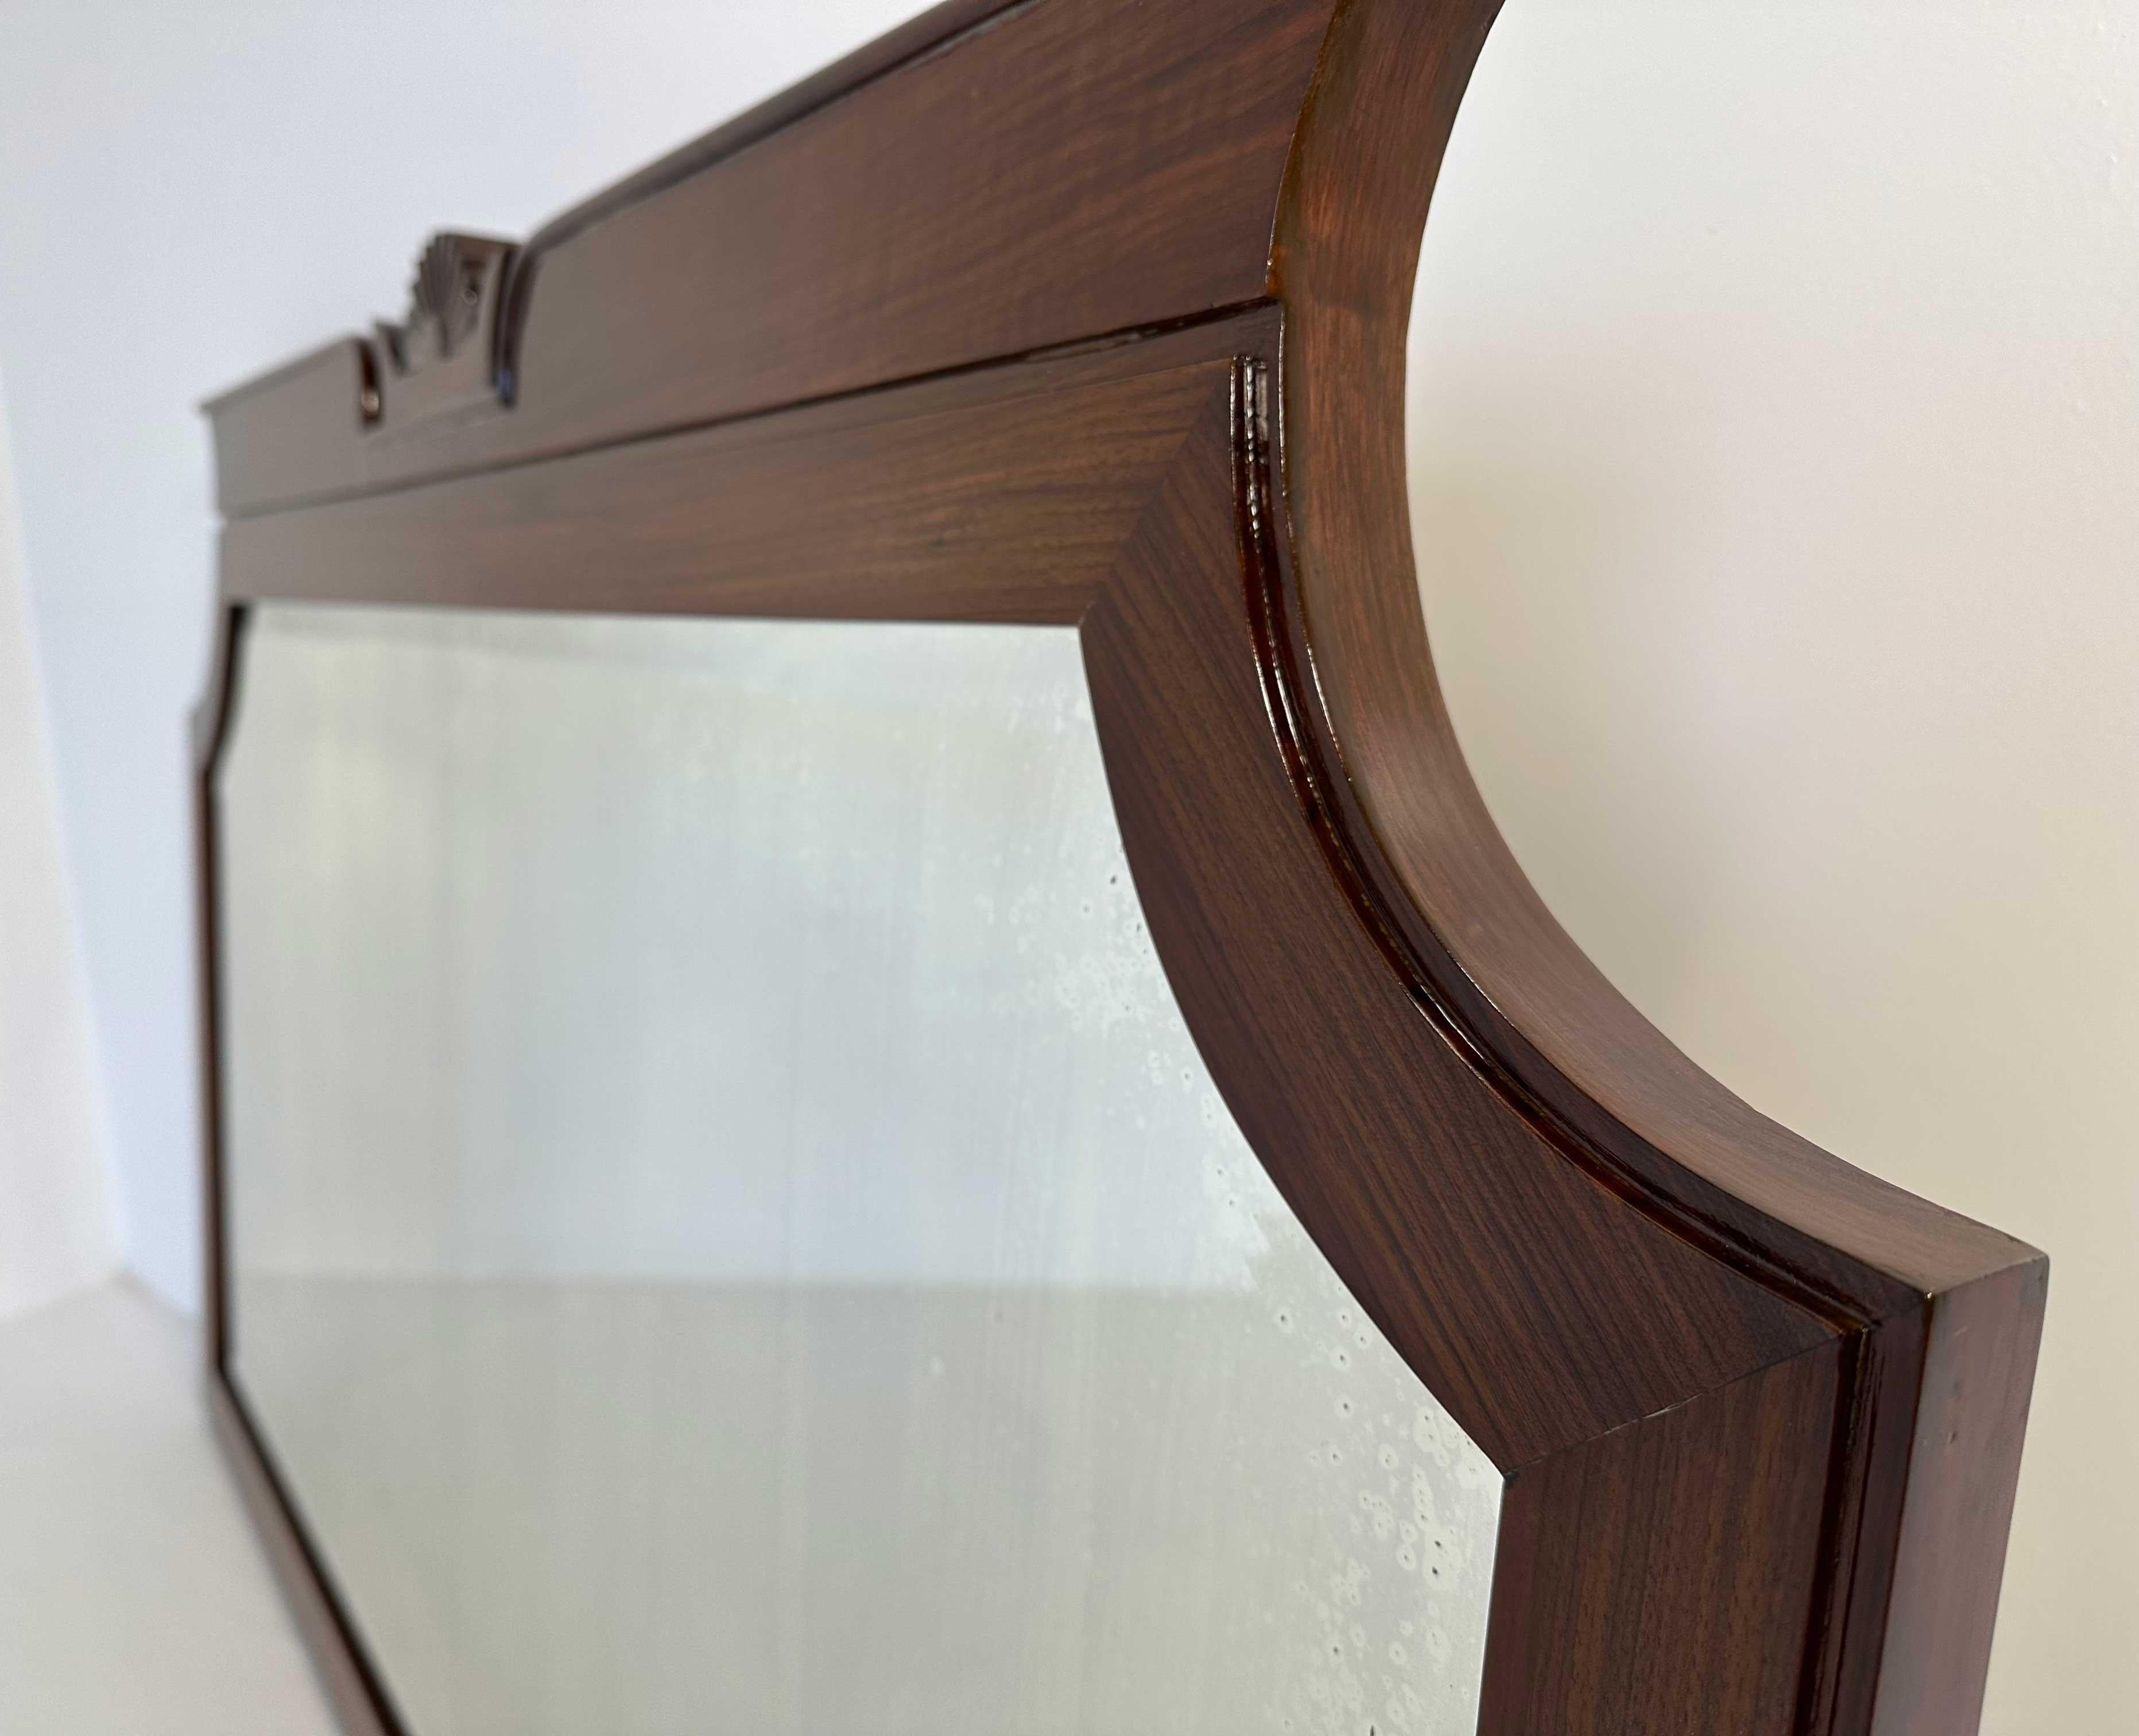 Italian Walnut Mirror by Gio Ponti and L. Brusotti for P. Lietti, 1928 In Good Condition For Sale In Meda, MB